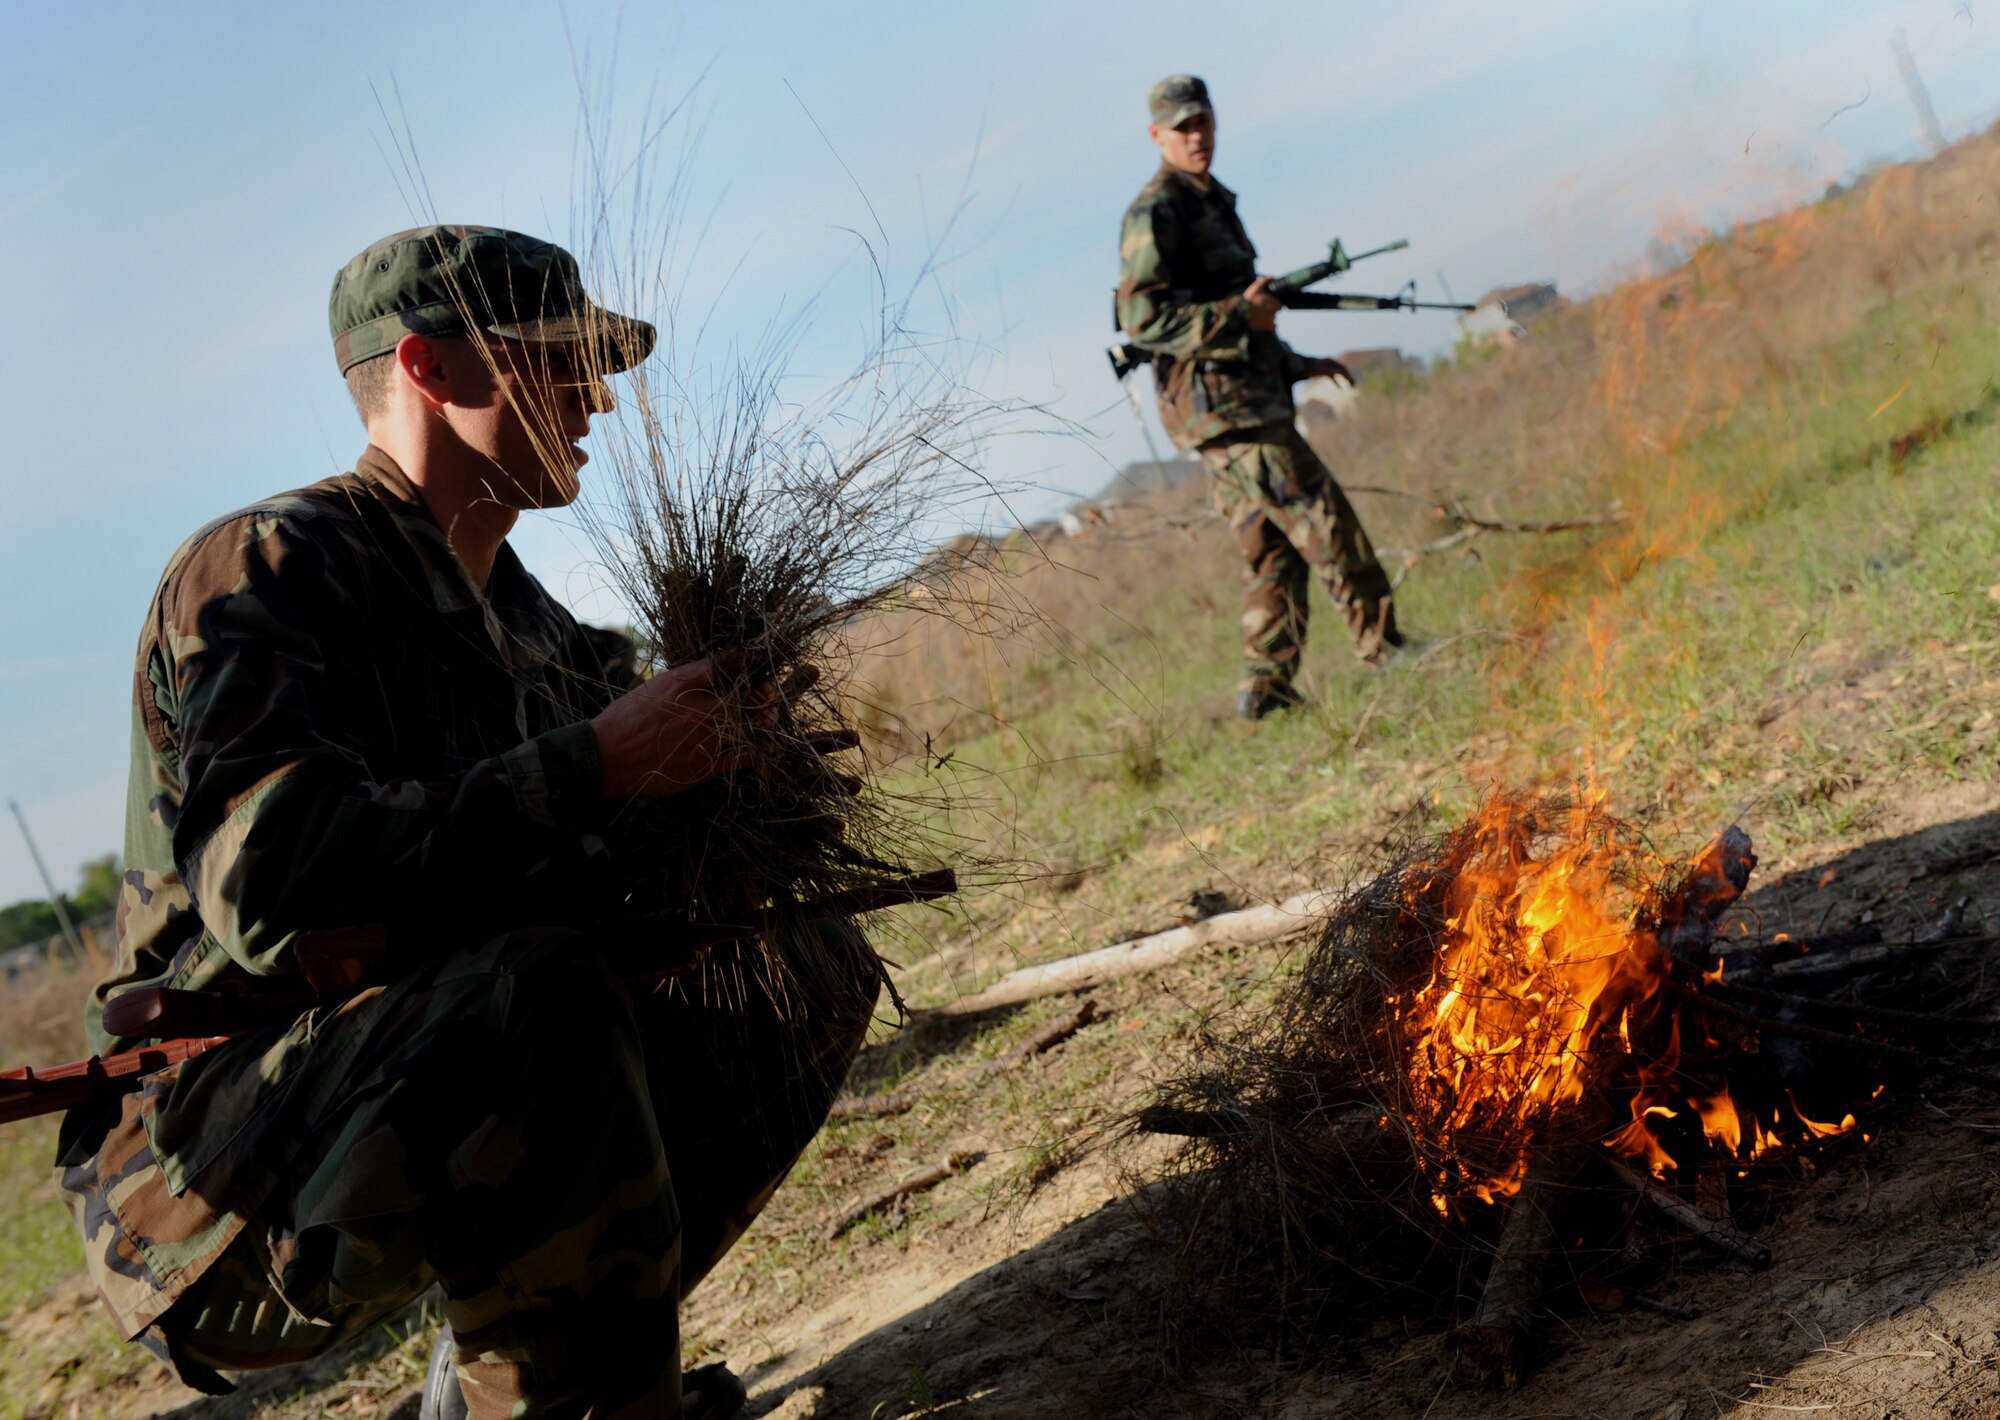 MOODY AIR FORCE BASE, Ga. -- A candidate from class 09A who is enrolled in the combat rescue officer selection course prepares to put brush onto a fire while another classmate collects sticks here March 25. The candidate's objective was to build a knee high maintainable fire. (U.S. Air Force photo by Senior Airman Gina Chiaverotti) 